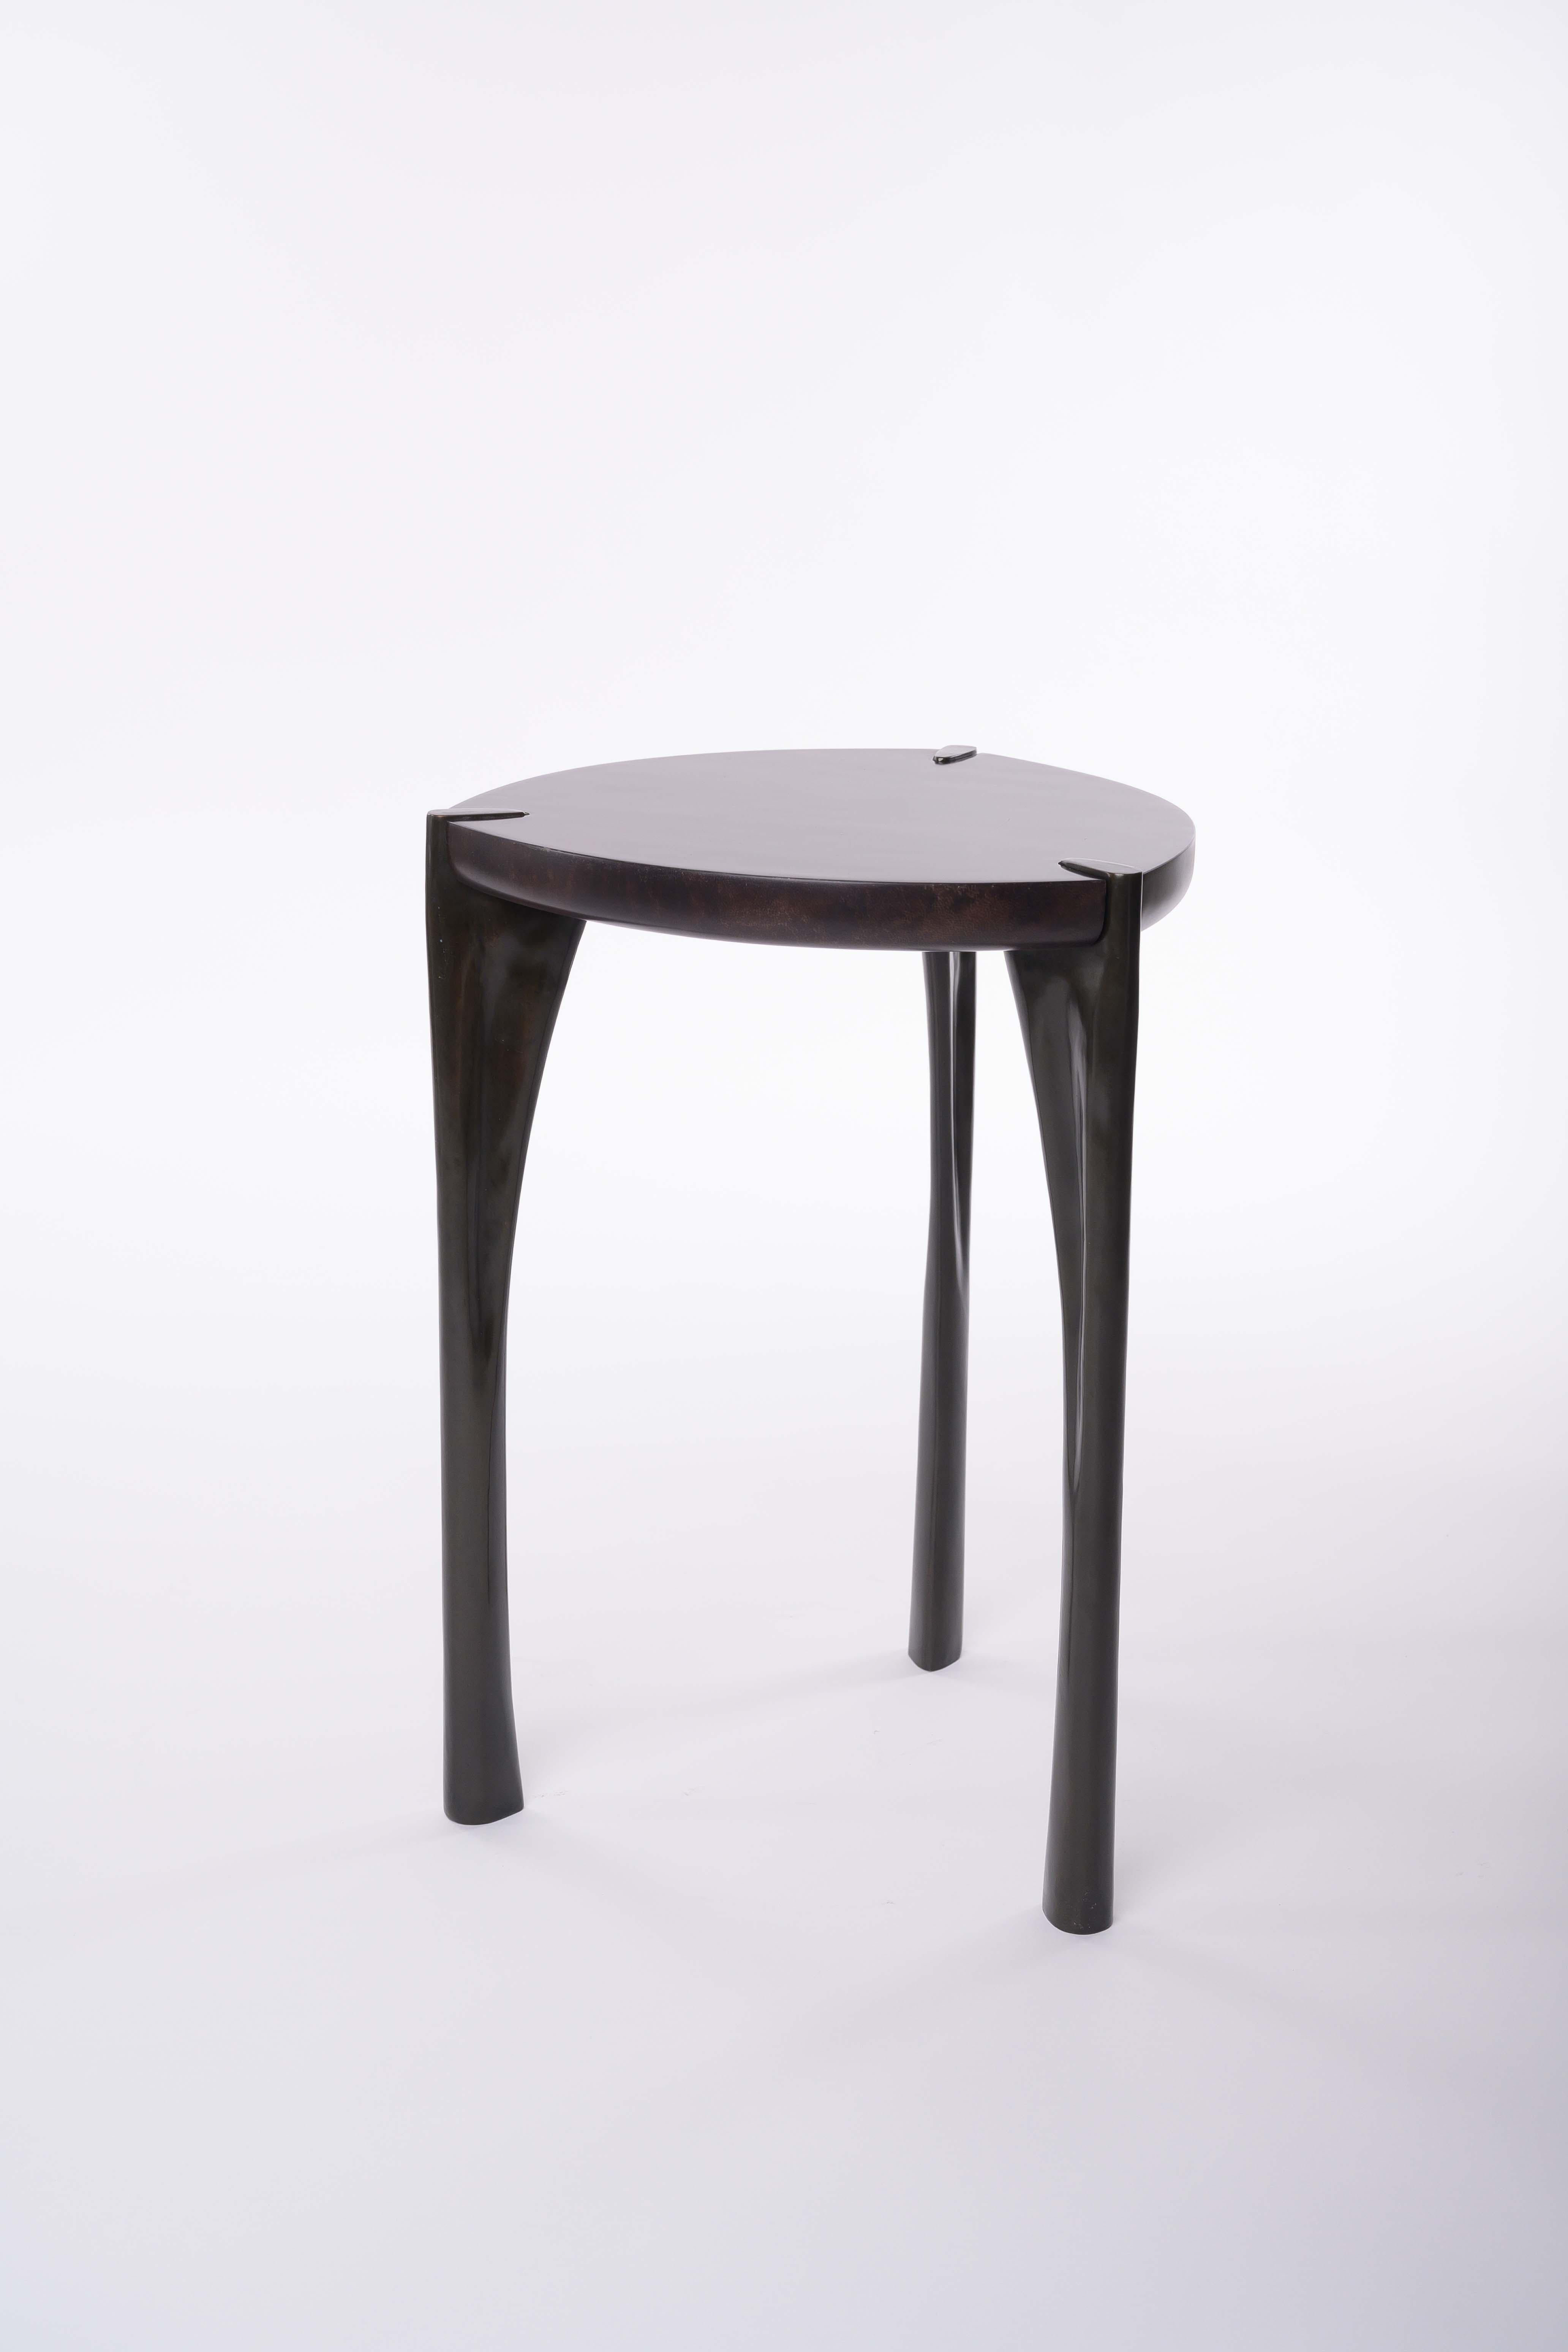 Made to order Tall Oscar Side Table with parchment top and cast bronze legs by Elan Atelier

The Oscar Side Tables, tall and low, are an elegant statement inspired by early to mid-century French furniture. The tapered bronze legs are in dark bronze